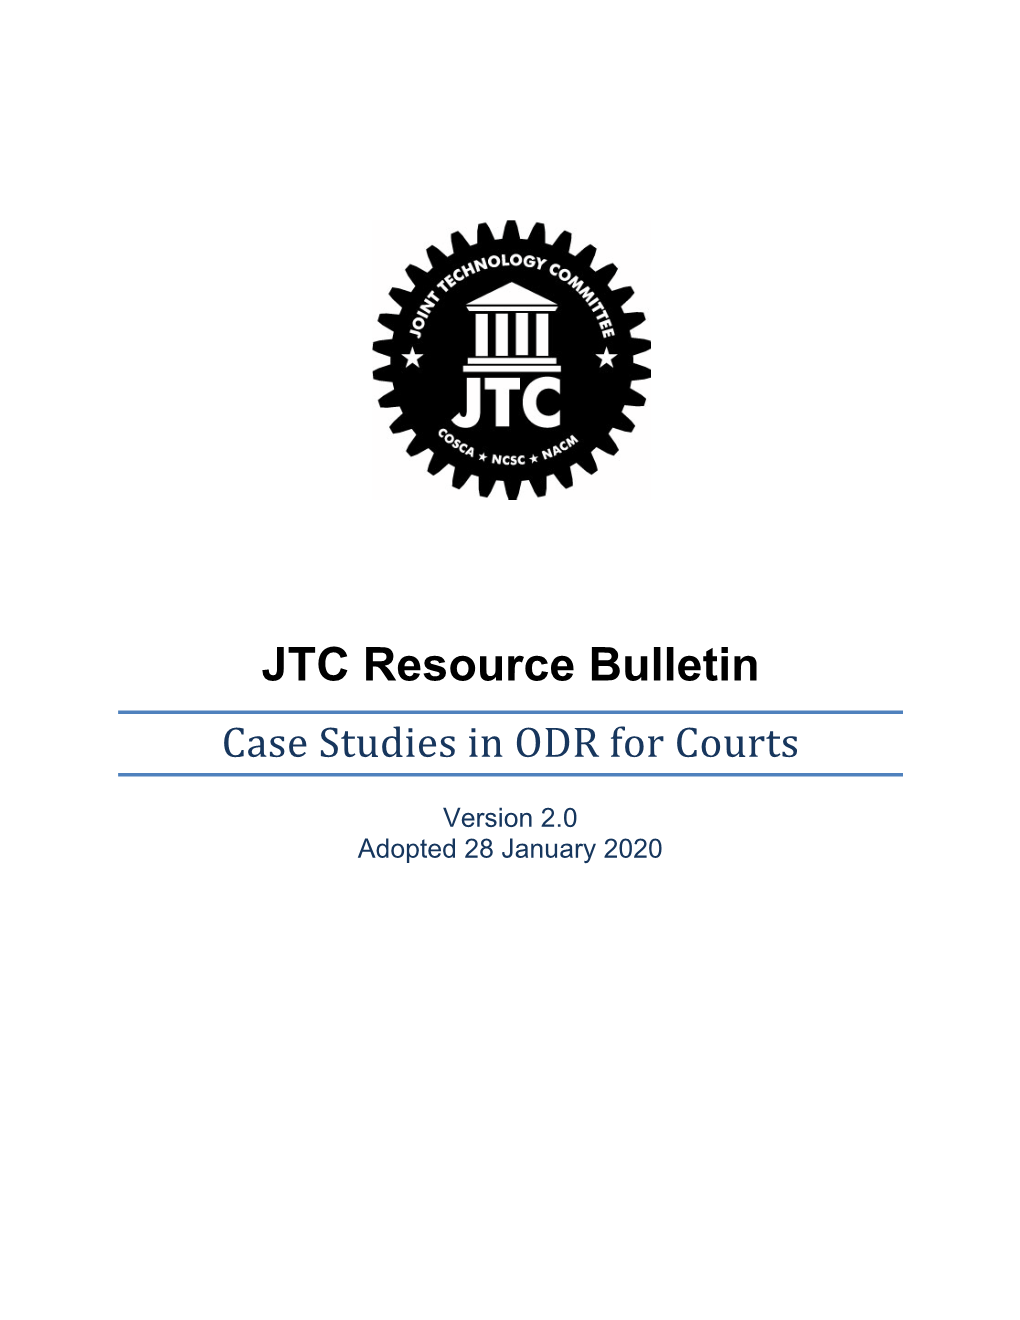 Case Studies in ODR for Courts